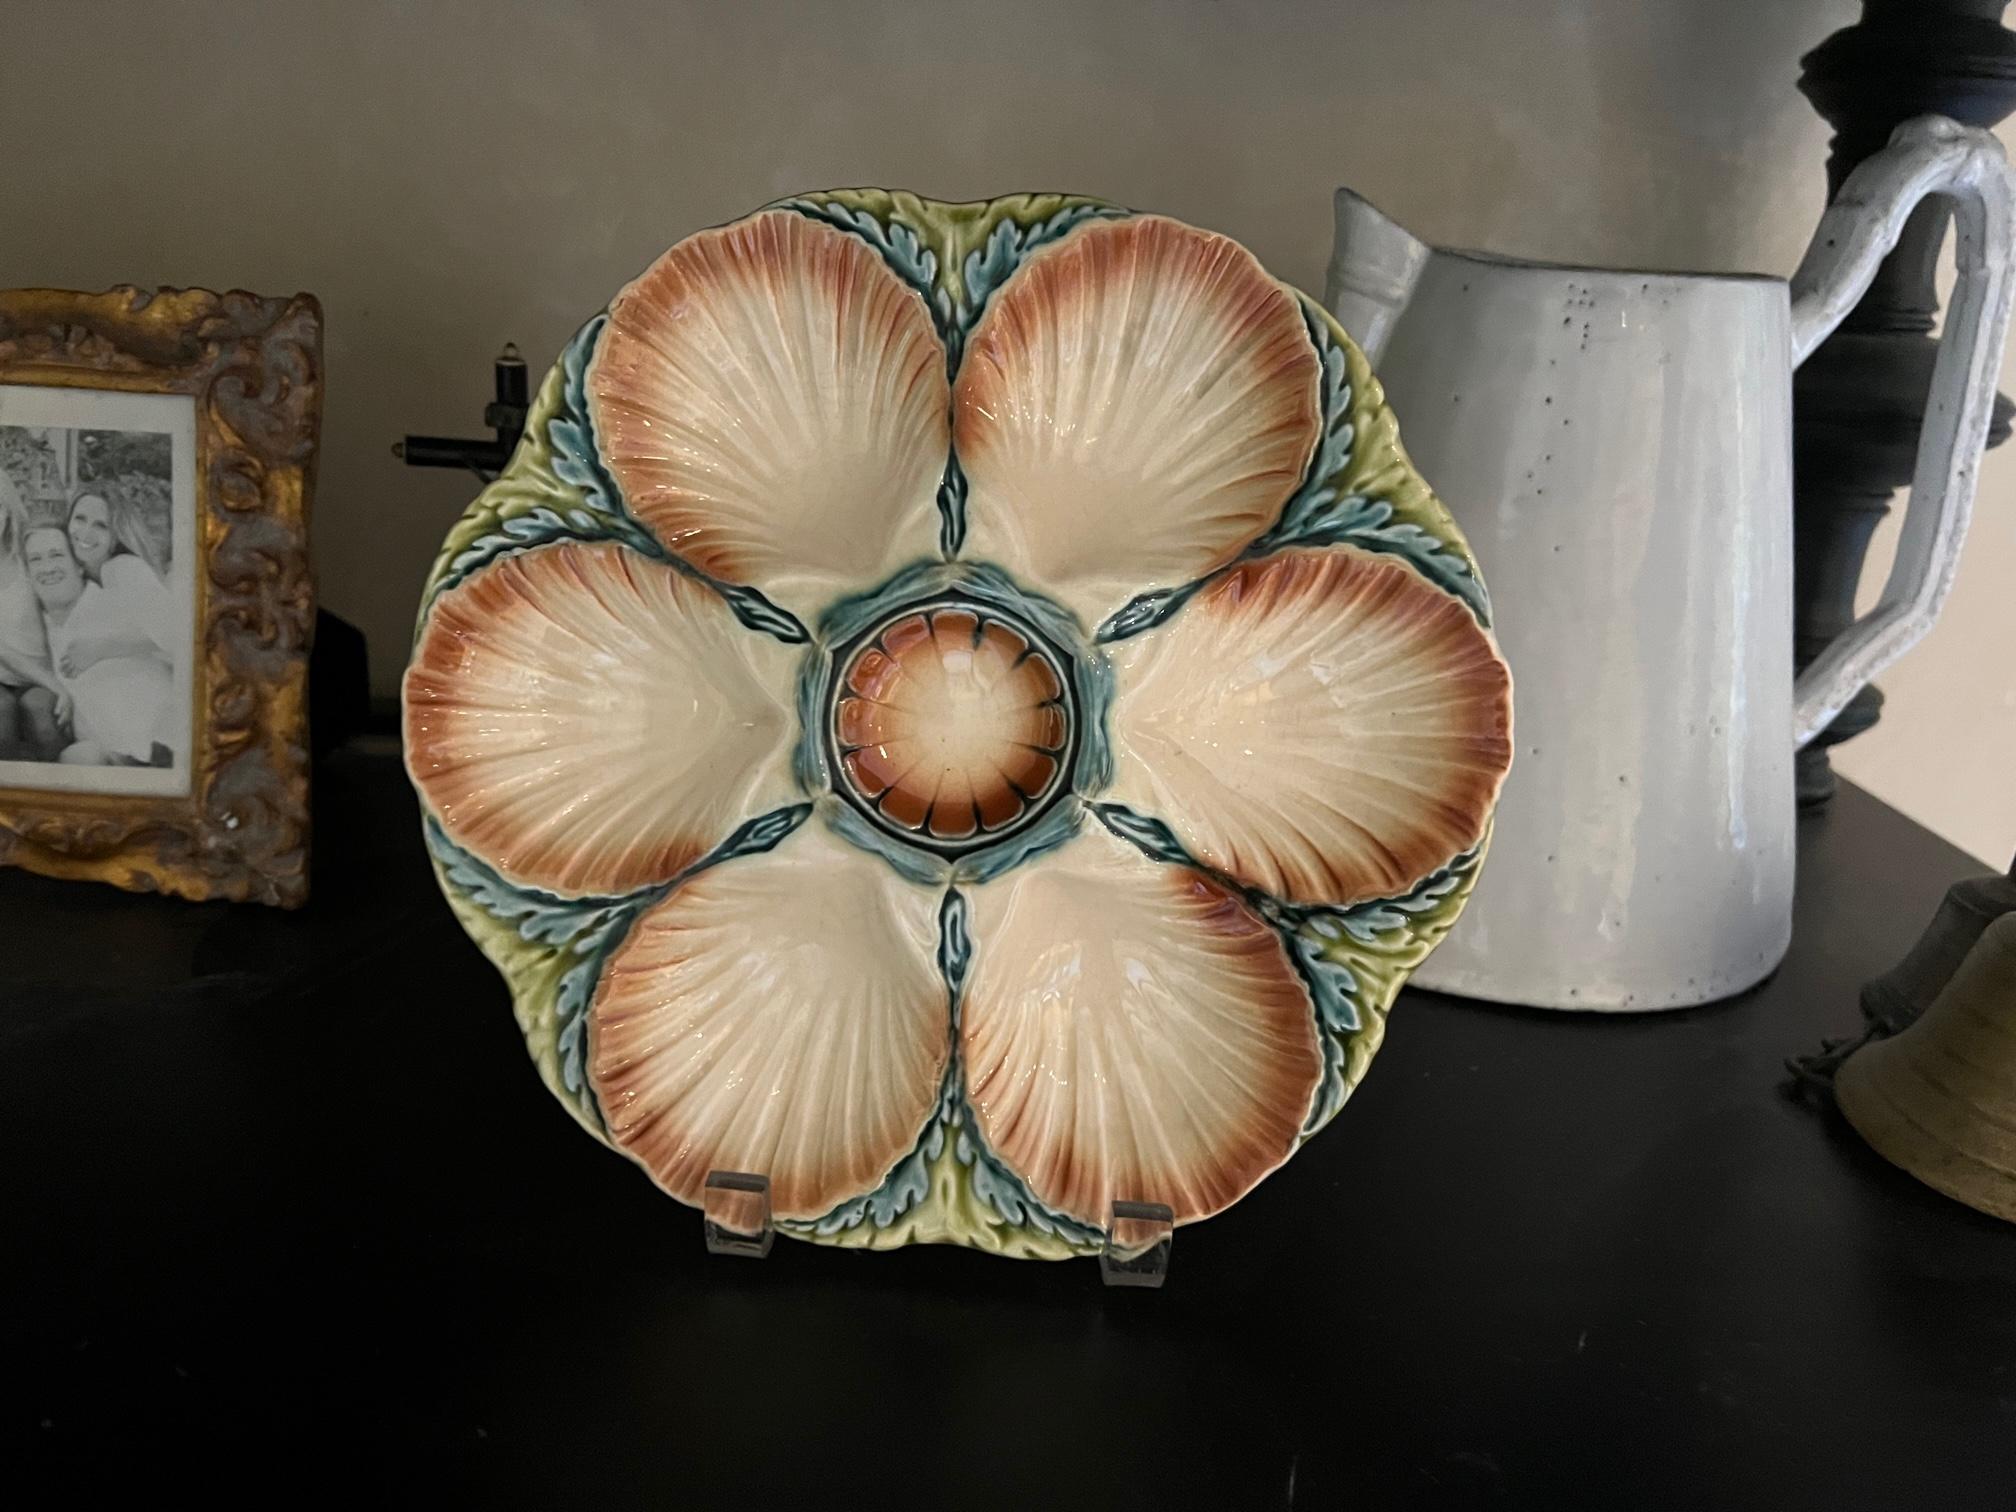 Antique French majolica oyster plate made by Sarreguemines around 1890. The plate has a seaweed motif on the edges with six shell shaped wells for oysters or scallops. The center well is for lemon or sauce.